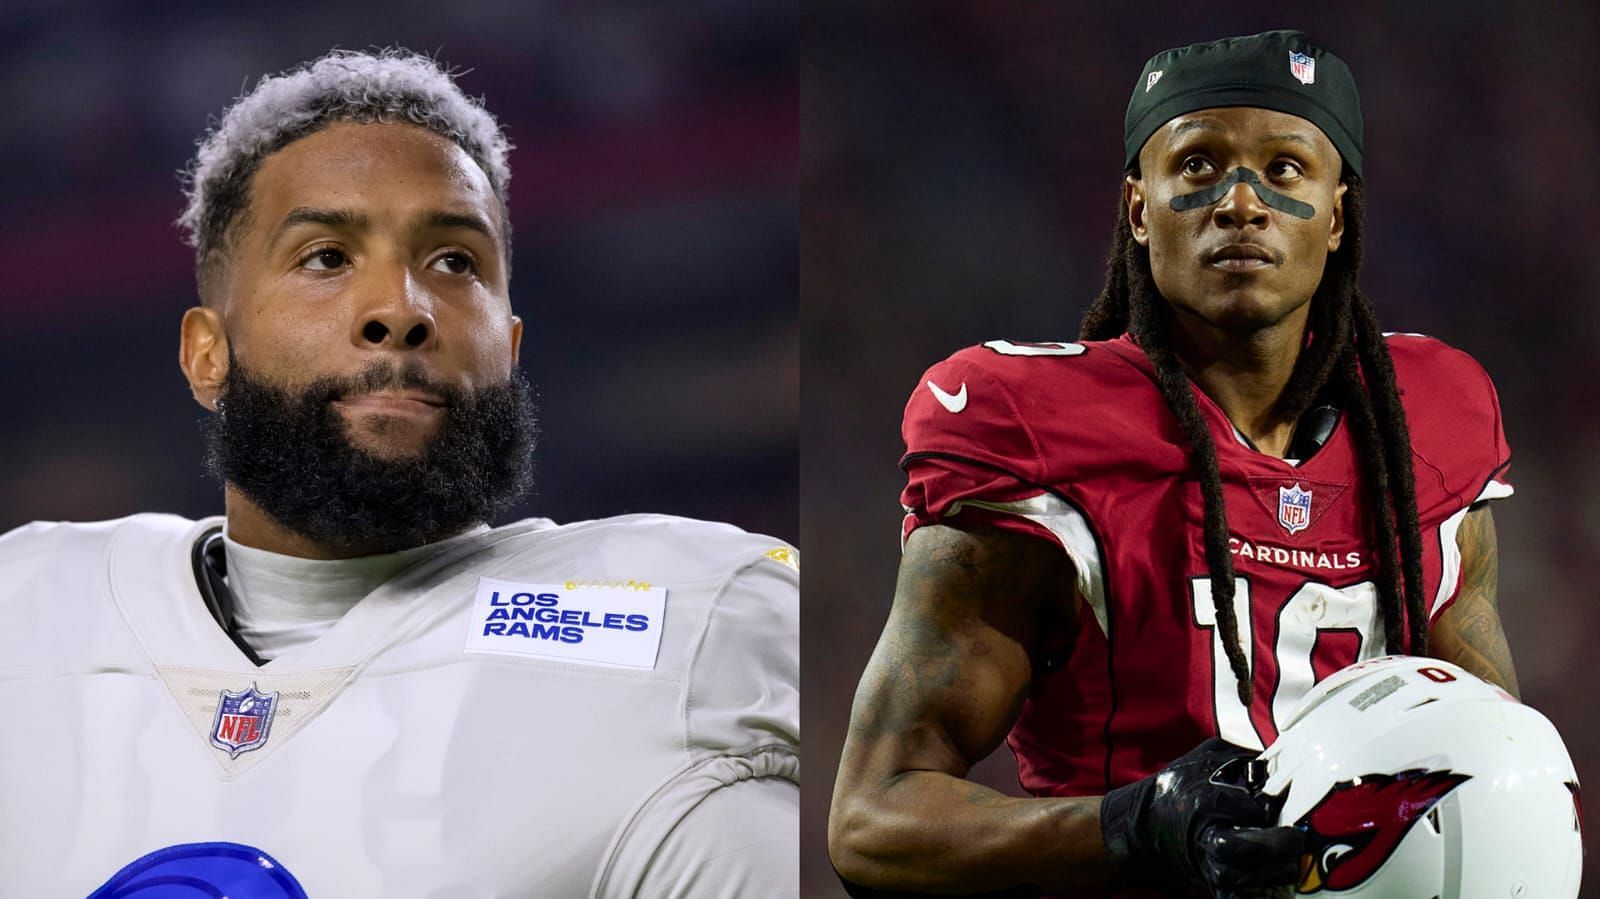 DeAndre Hopkins (right) is now being linked with a move to the Jets following failed OBJ bid 